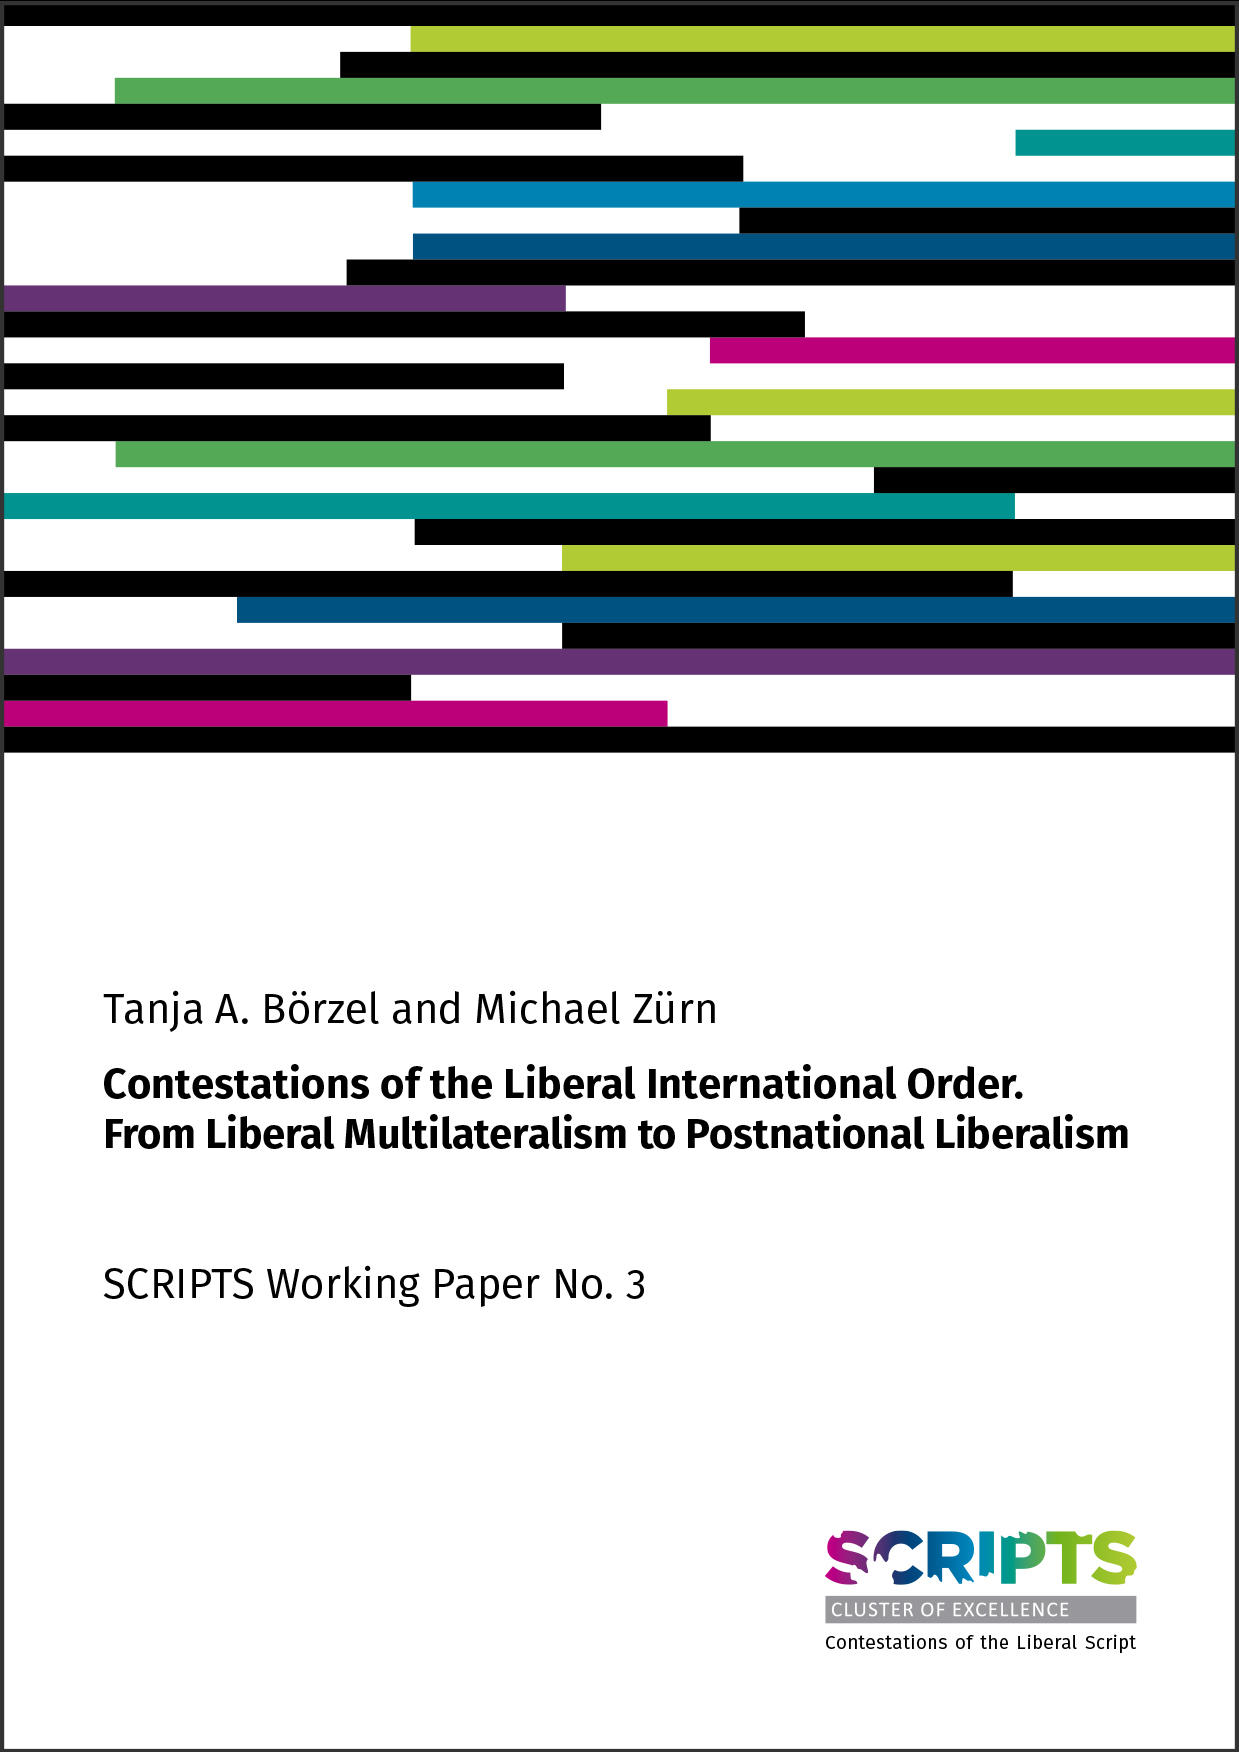 SCRIPTS_Working_Paper_3_Cover